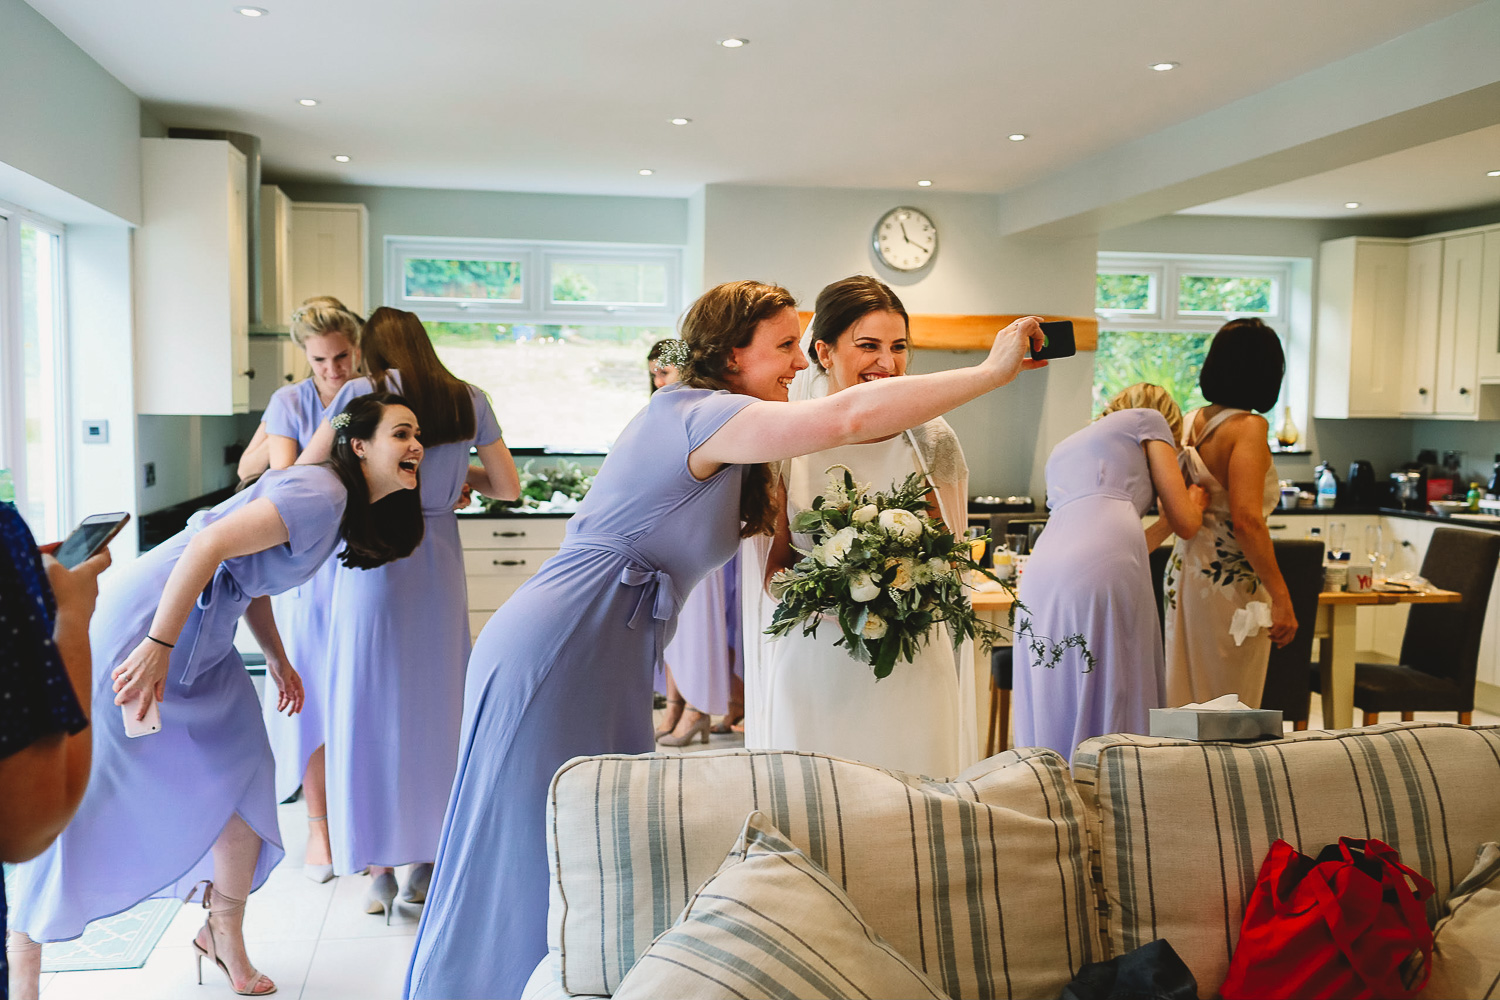 Bridesmaid taking selfie with the bride and another bridesmaid photobombing and pulling funny face in the background at fun Sheffield wedding 